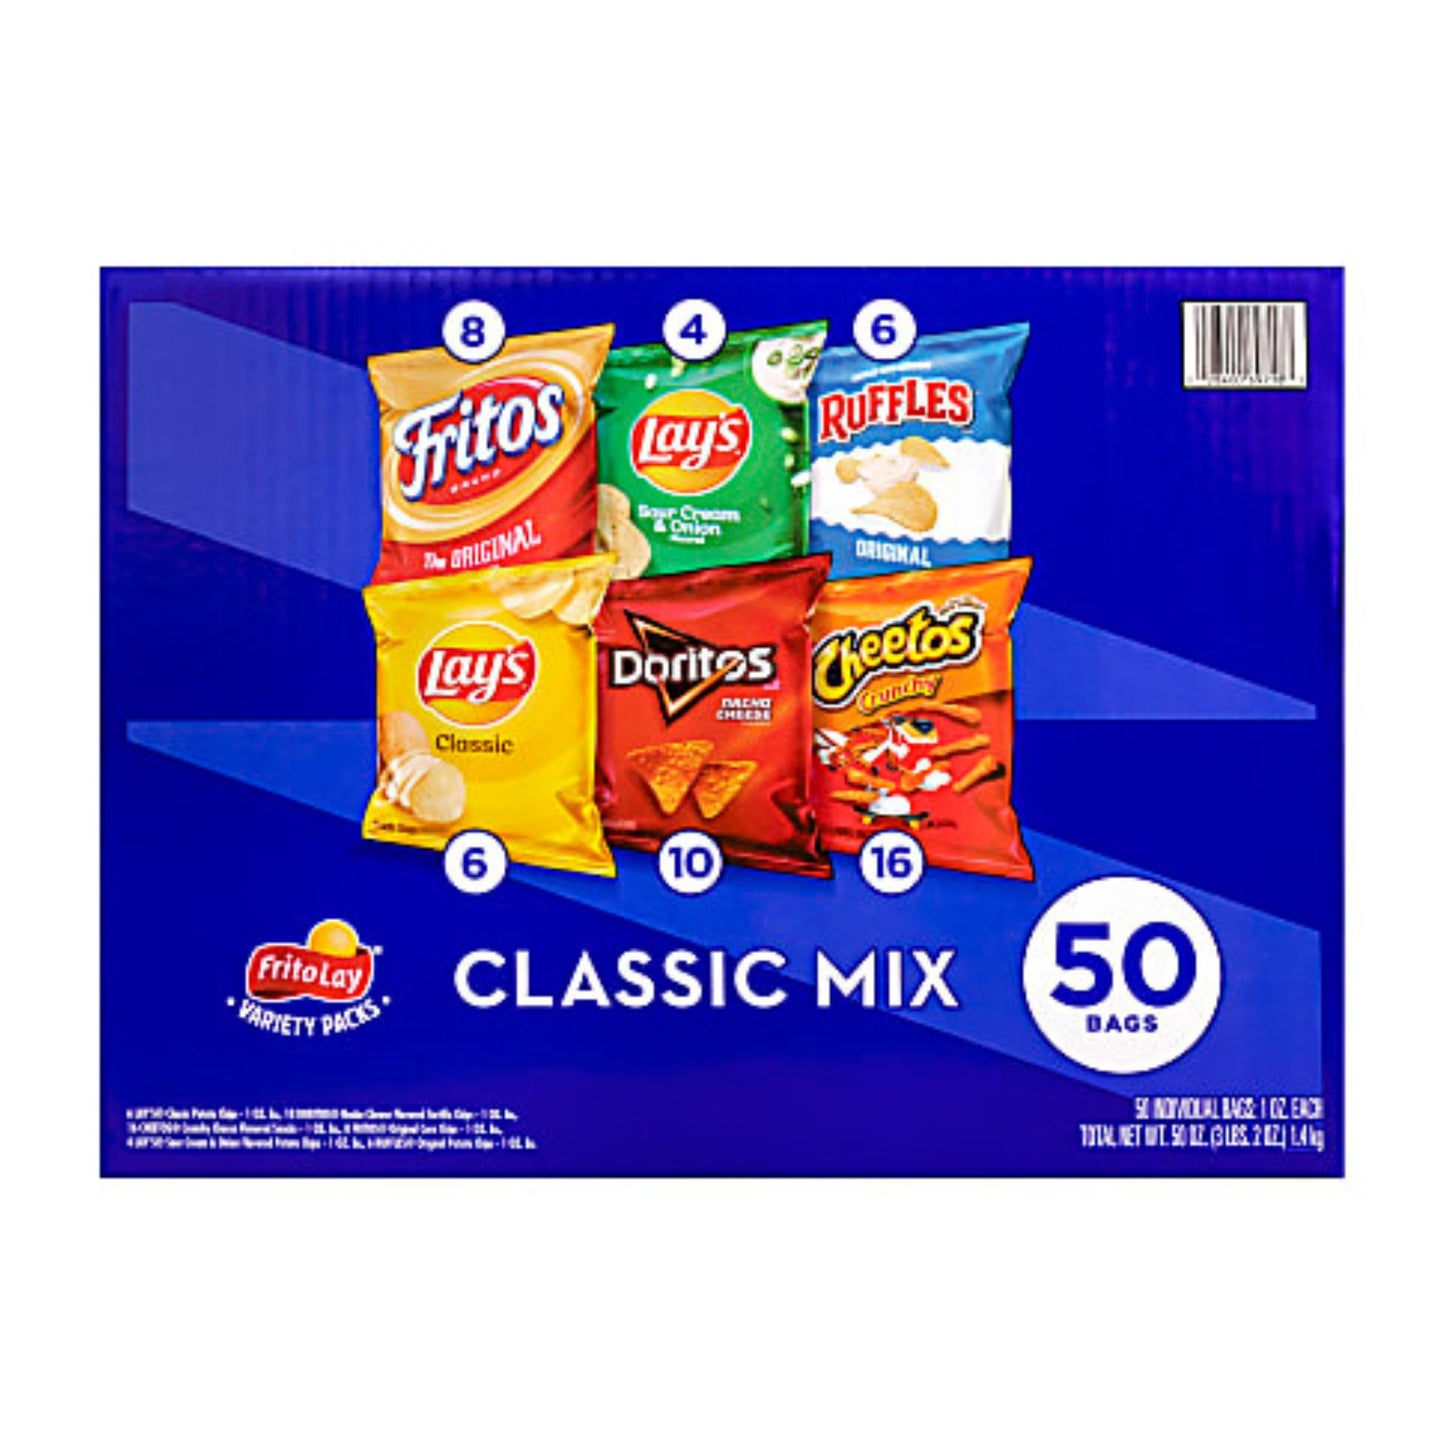 Frito-Lay Classic Mix Variety Pack 50bags per Pack